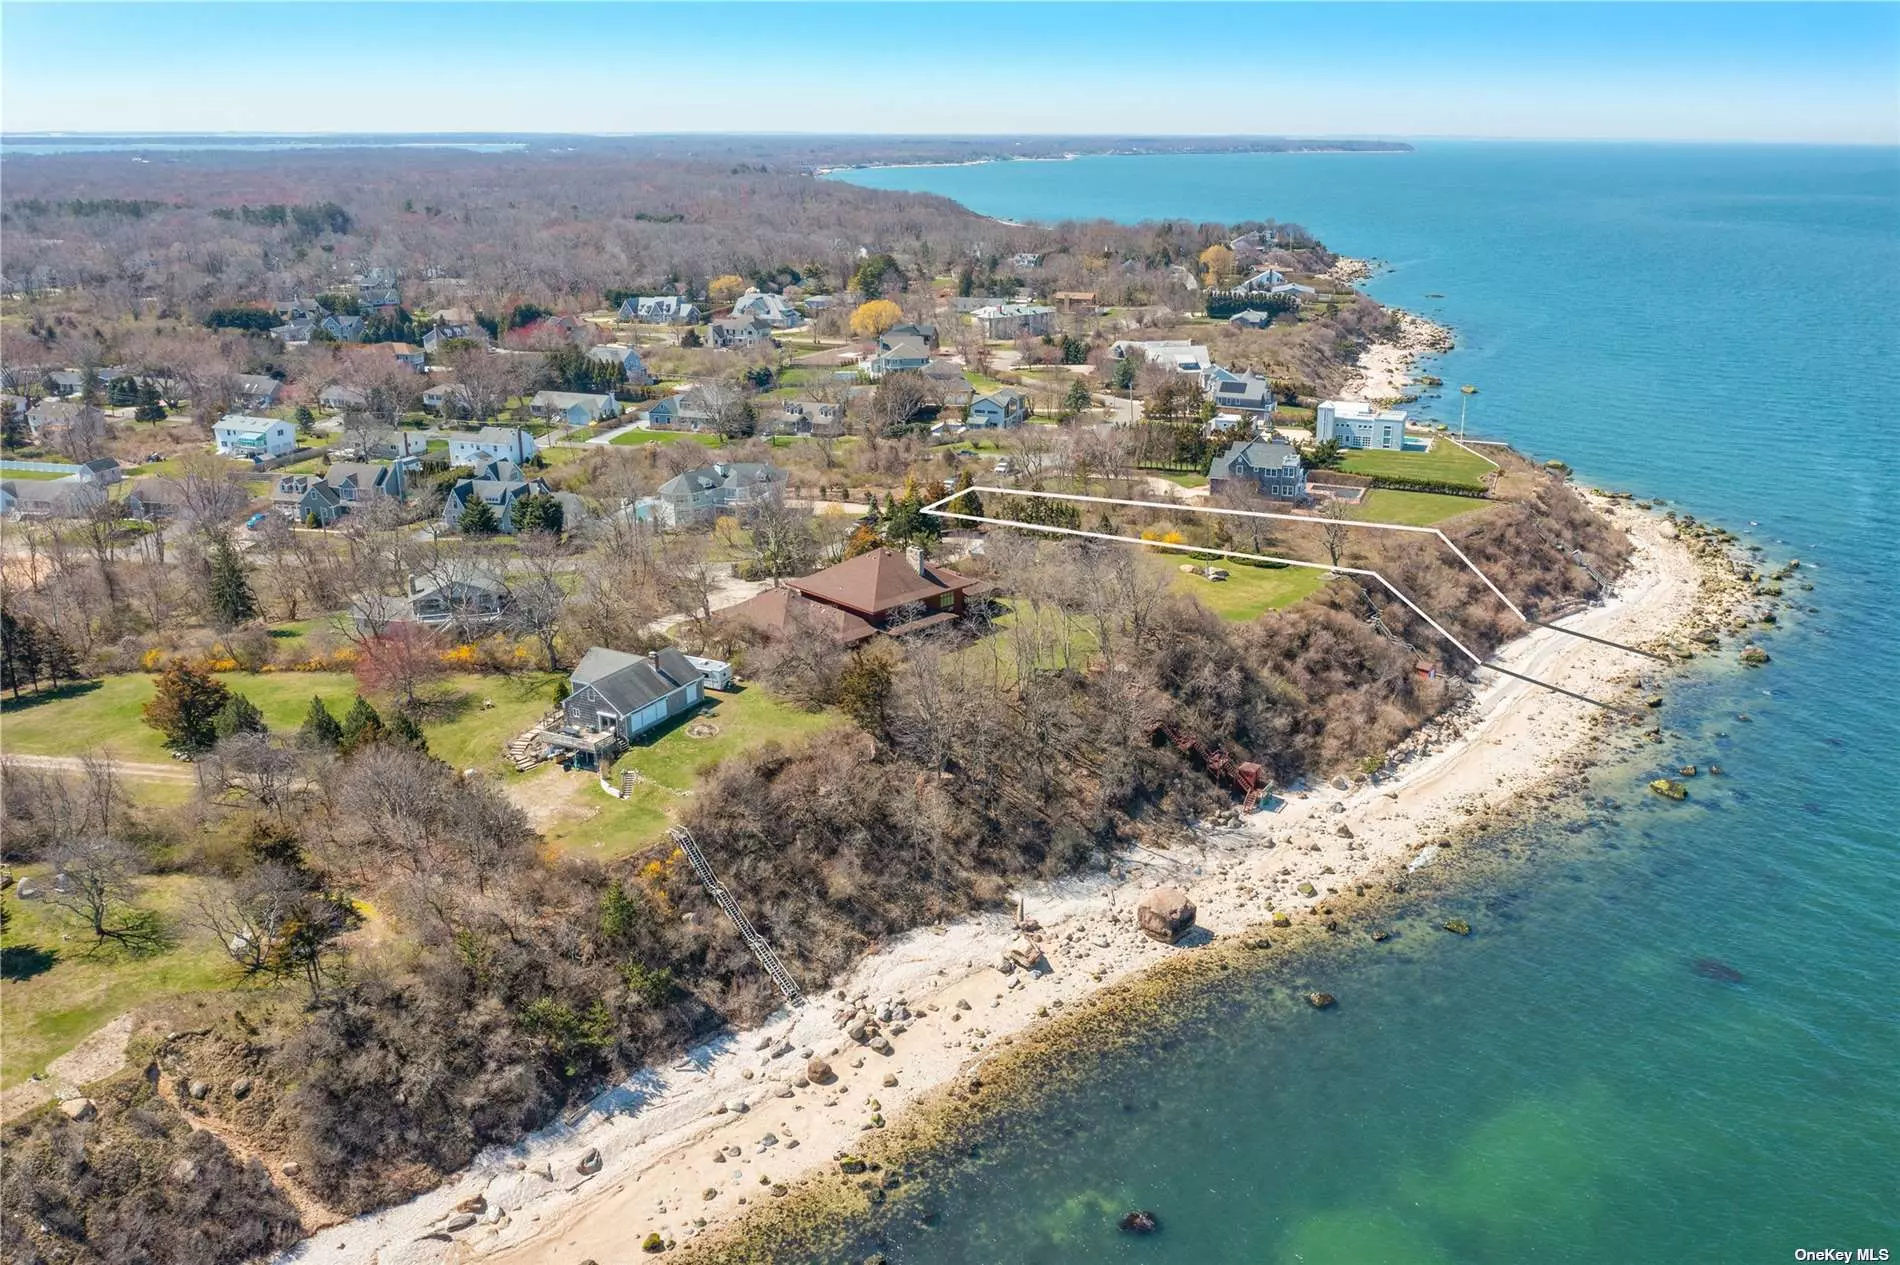 NEW TO THE MARKET! Stunning sandy beach, so reminiscent of the Greek Isles - right here on the North Fork...and you can walk the beach for miles! Shy acre property, with 104 feet of sound front beach and waterfront. Walk to town beach - 67 Steps going east and private association beach going west. Come build your dream waterfront home and enjoy the peace of magnificent sunsets, clear turquoise waters, and the excitement of Greenport village when you choose...